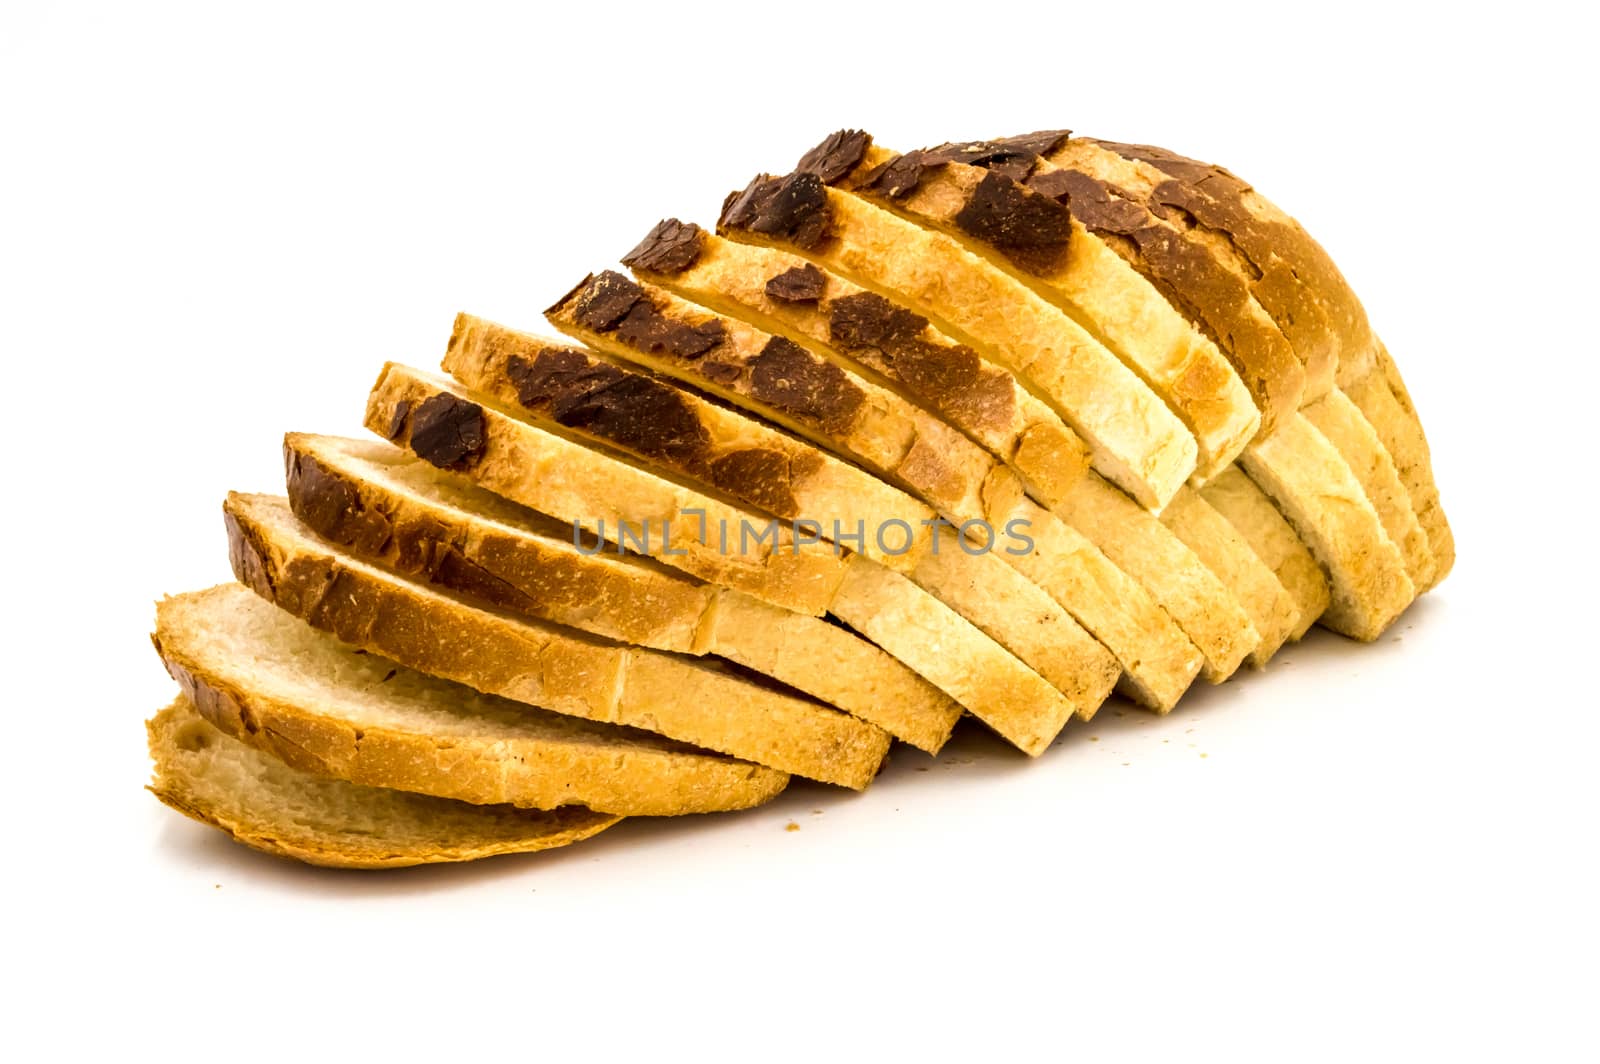 Homemade bread cut into slices on a white background